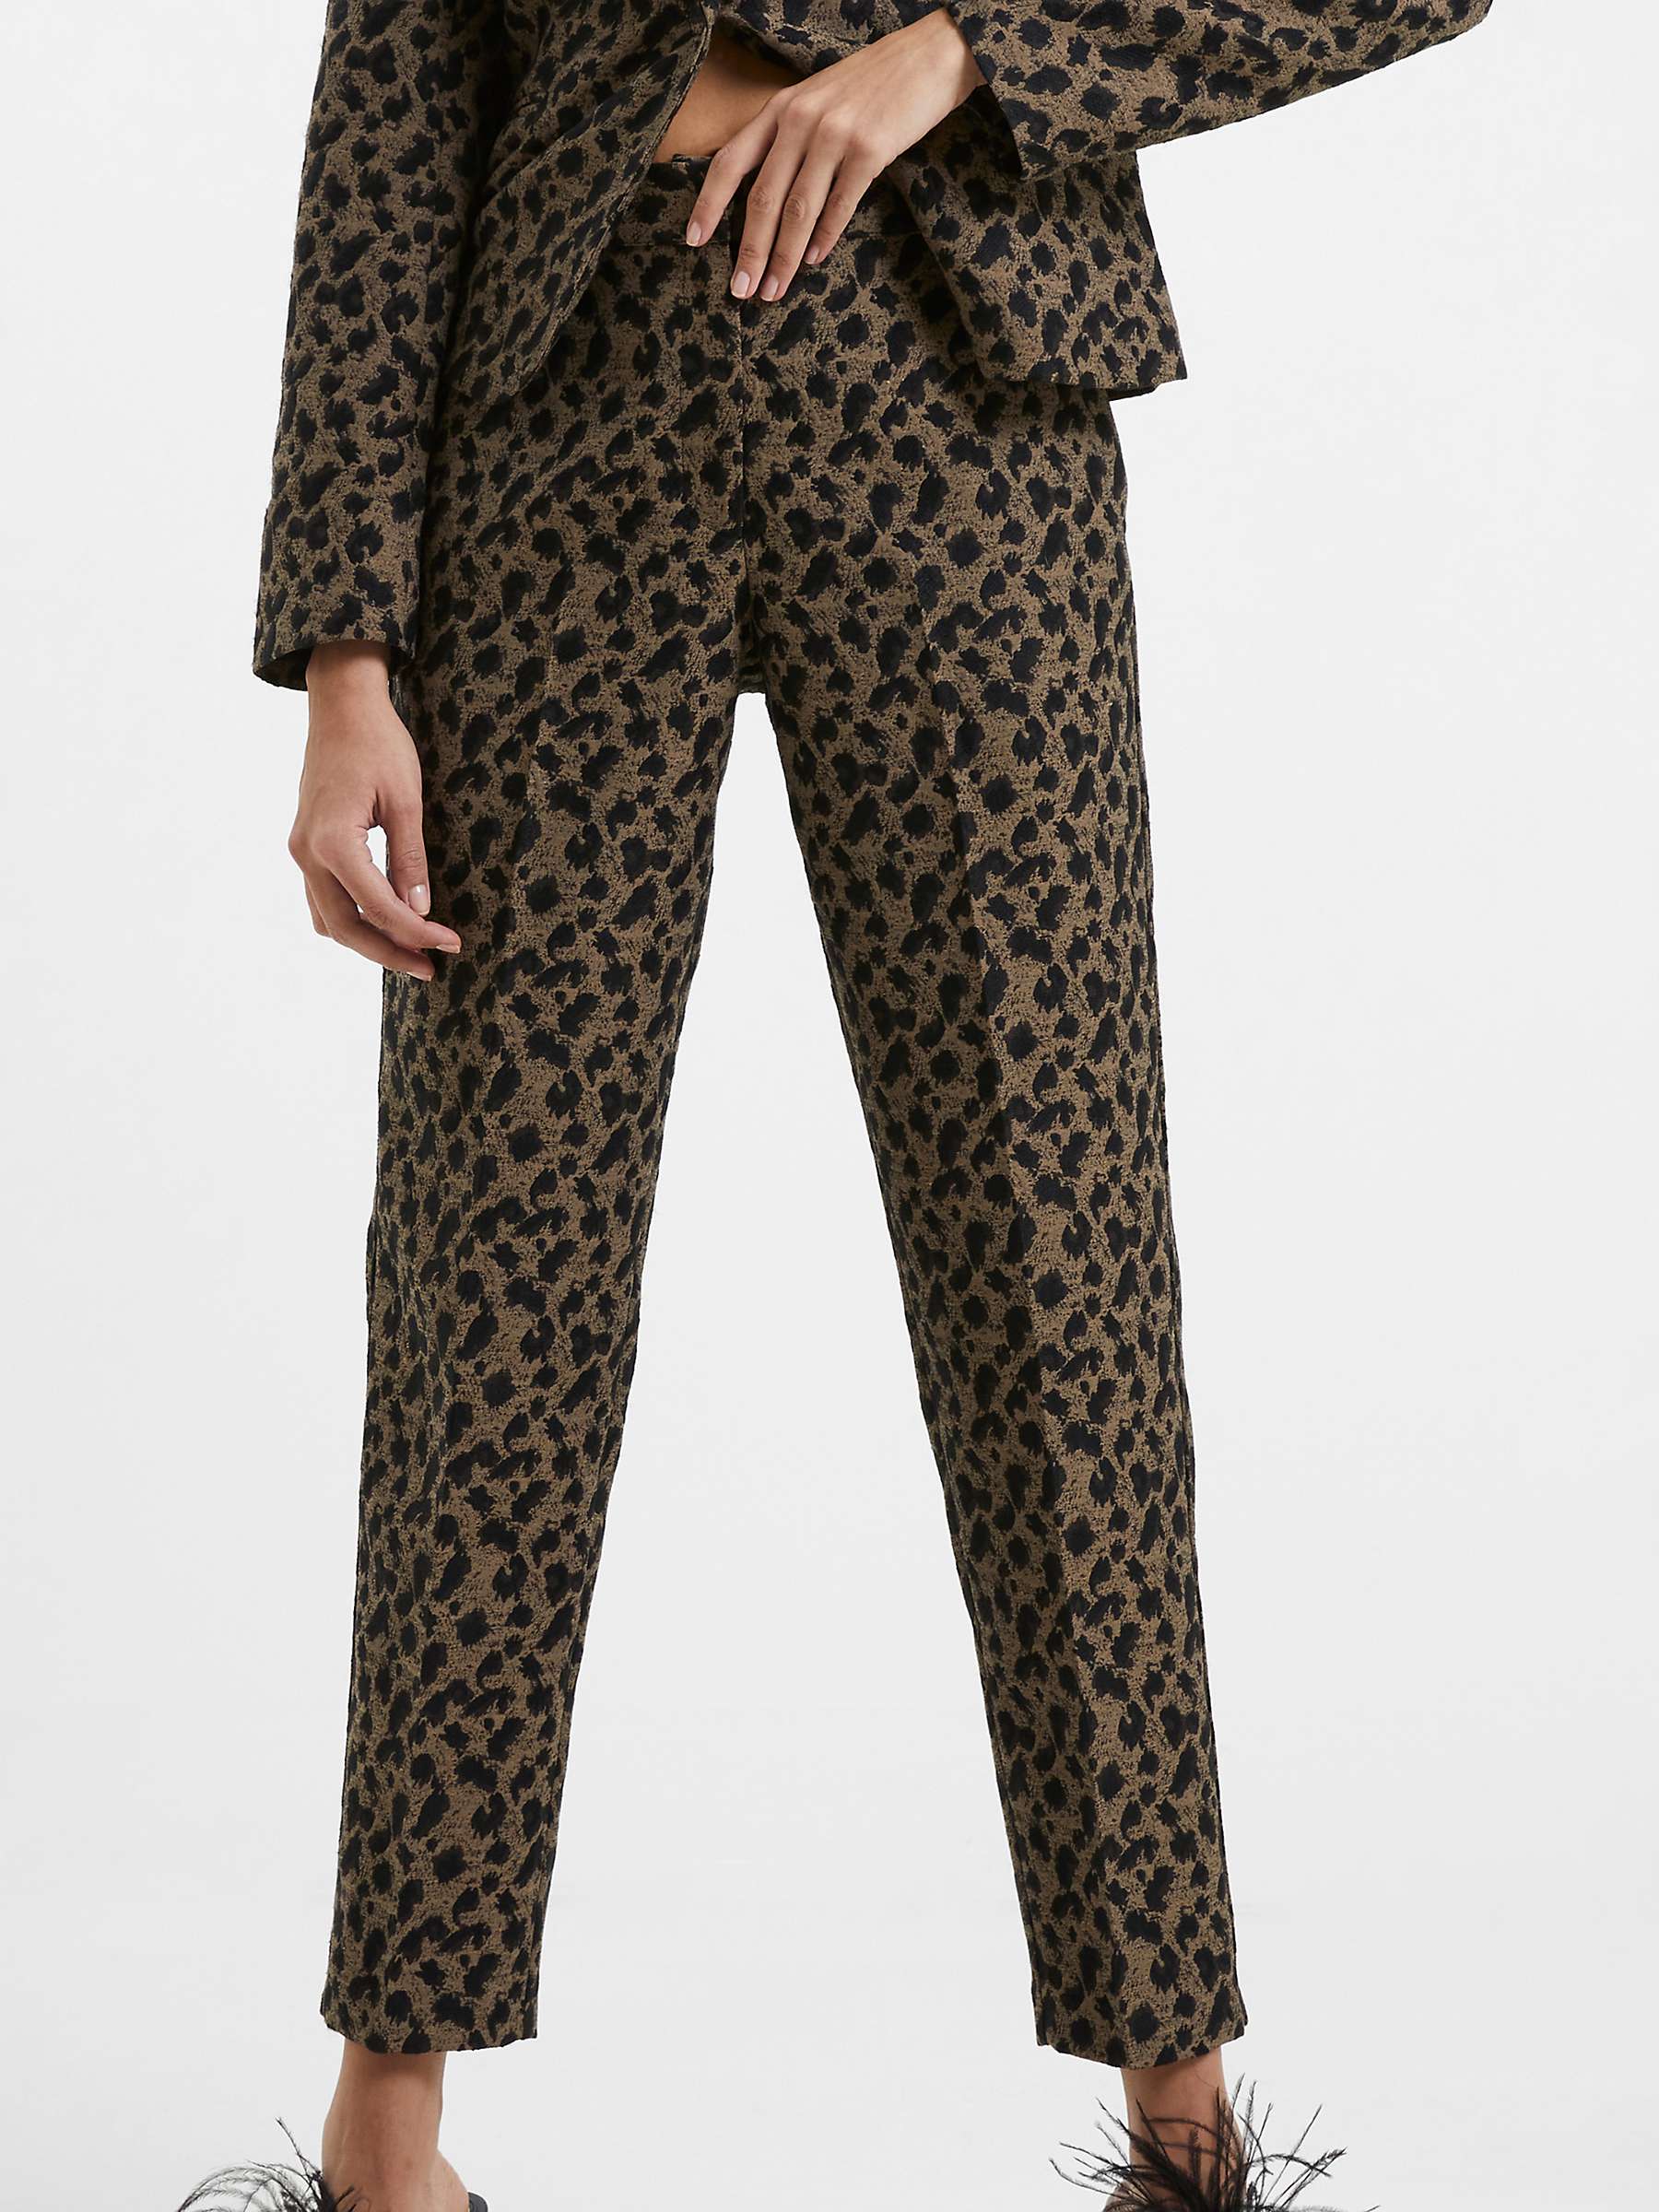 Buy French Connection Estella Jacquard Trousers, Black/Brown Online at johnlewis.com